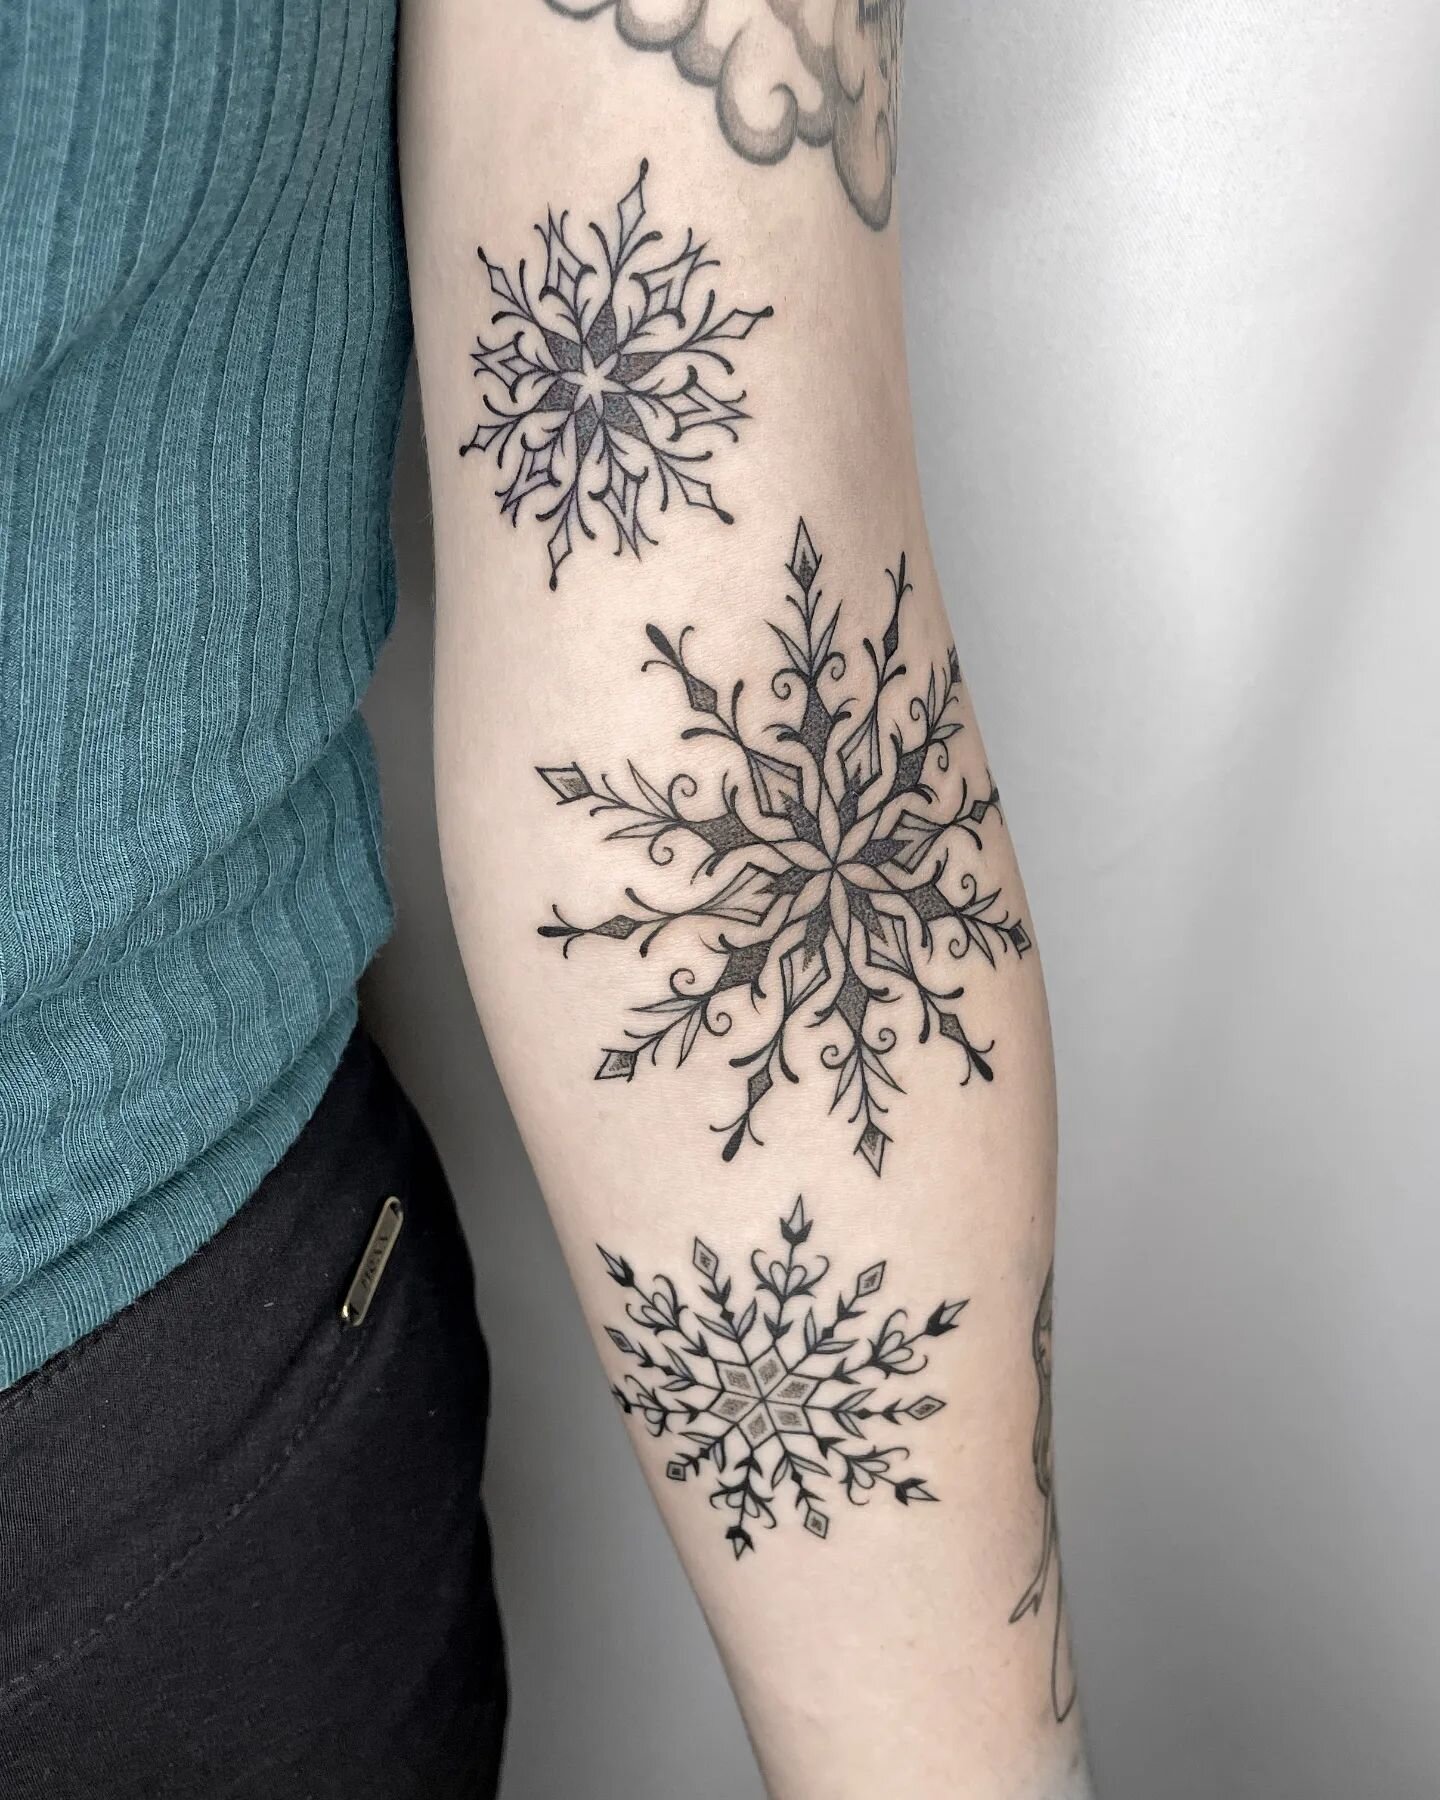 Snowflakes ❄️

A bit late posting this, but better later than never. Made this one in winter. ✨

For appointments: 
e.swan.art@outlook.com 

#tattoo #tattooart #tattooartist #tattooist #ink #inked #art #artist #tattooartist #latvianartist #latviantat